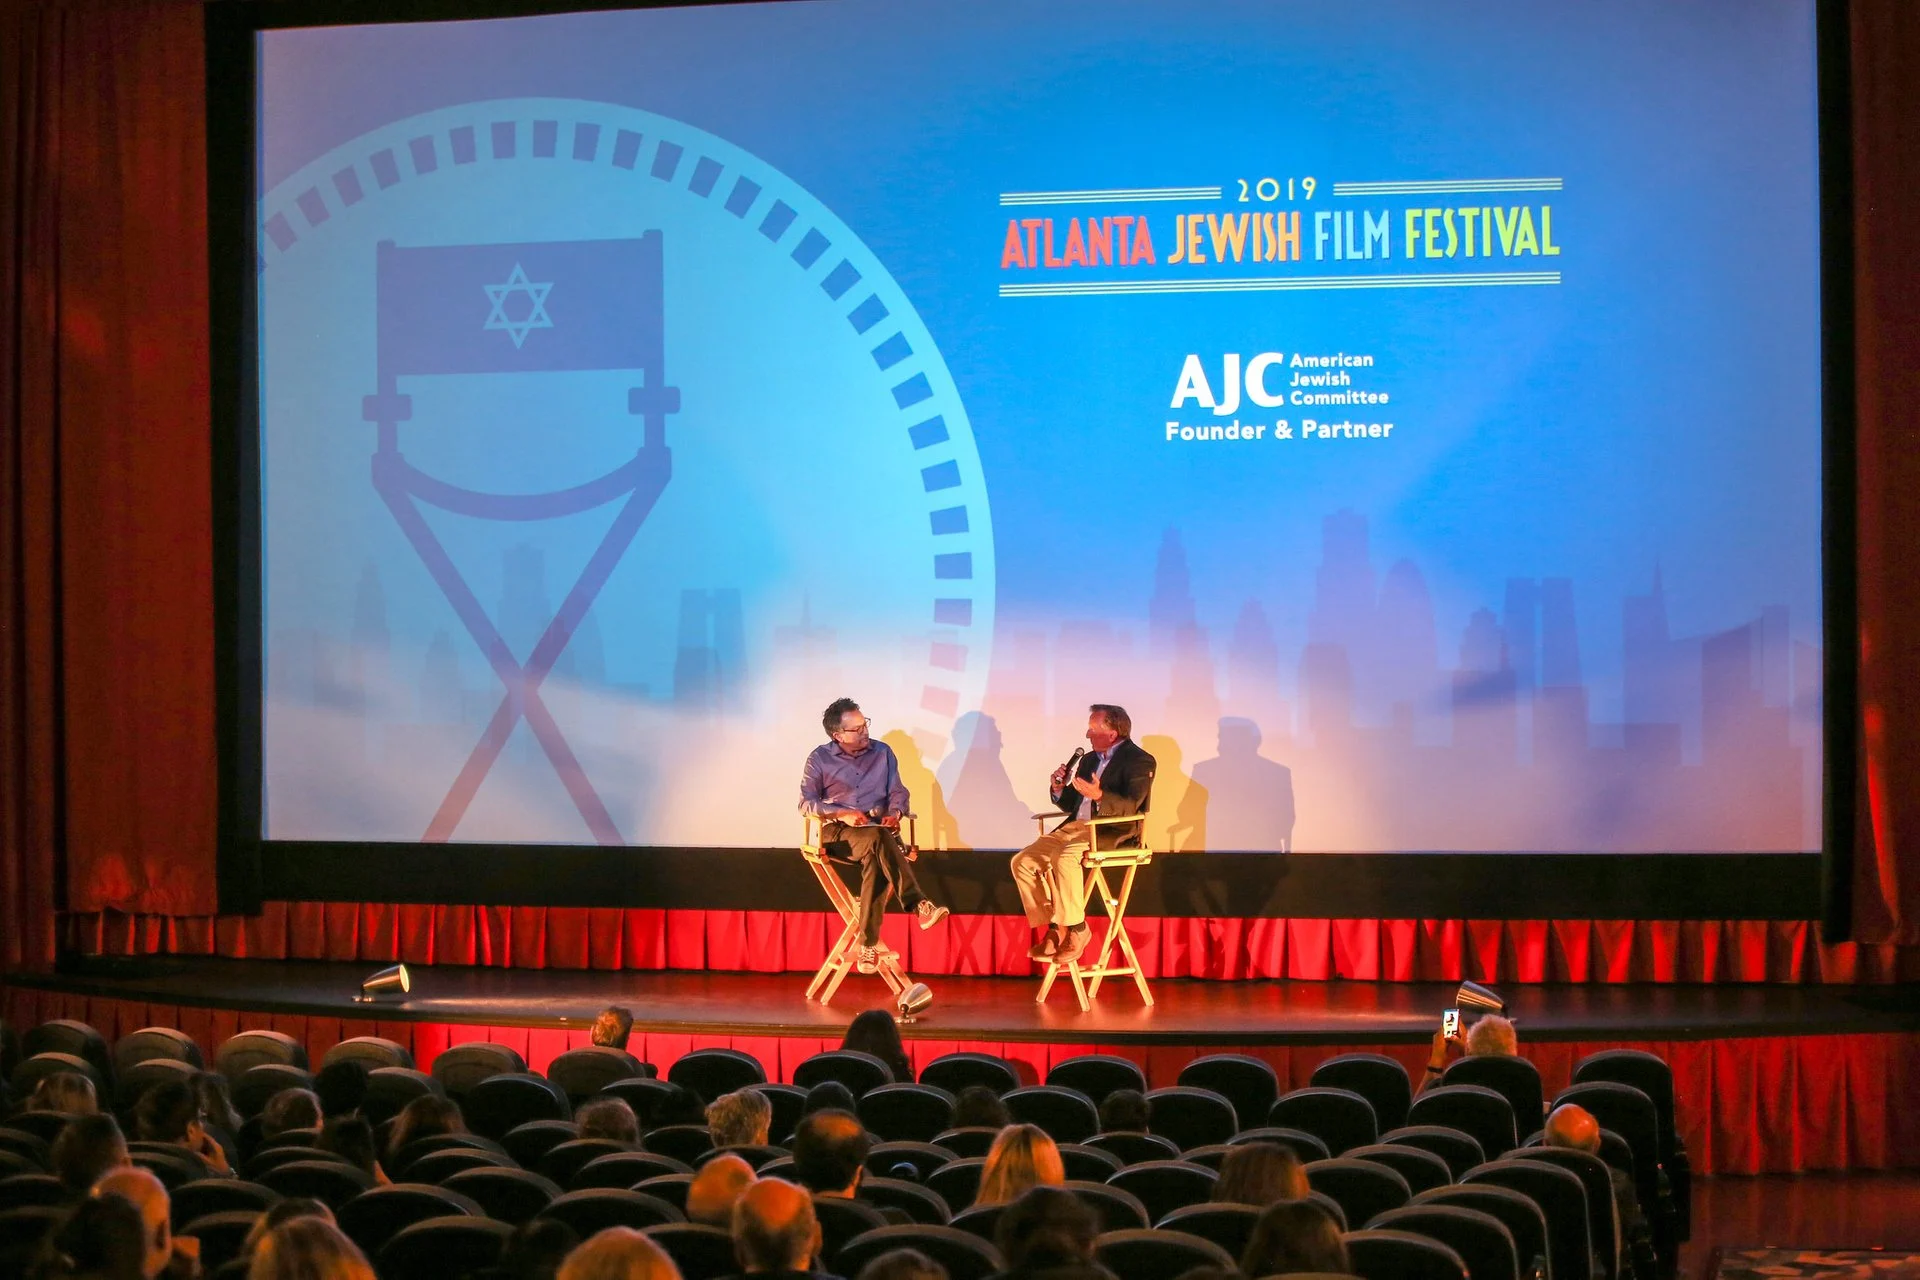 20-facts-about-jewish-film-festival